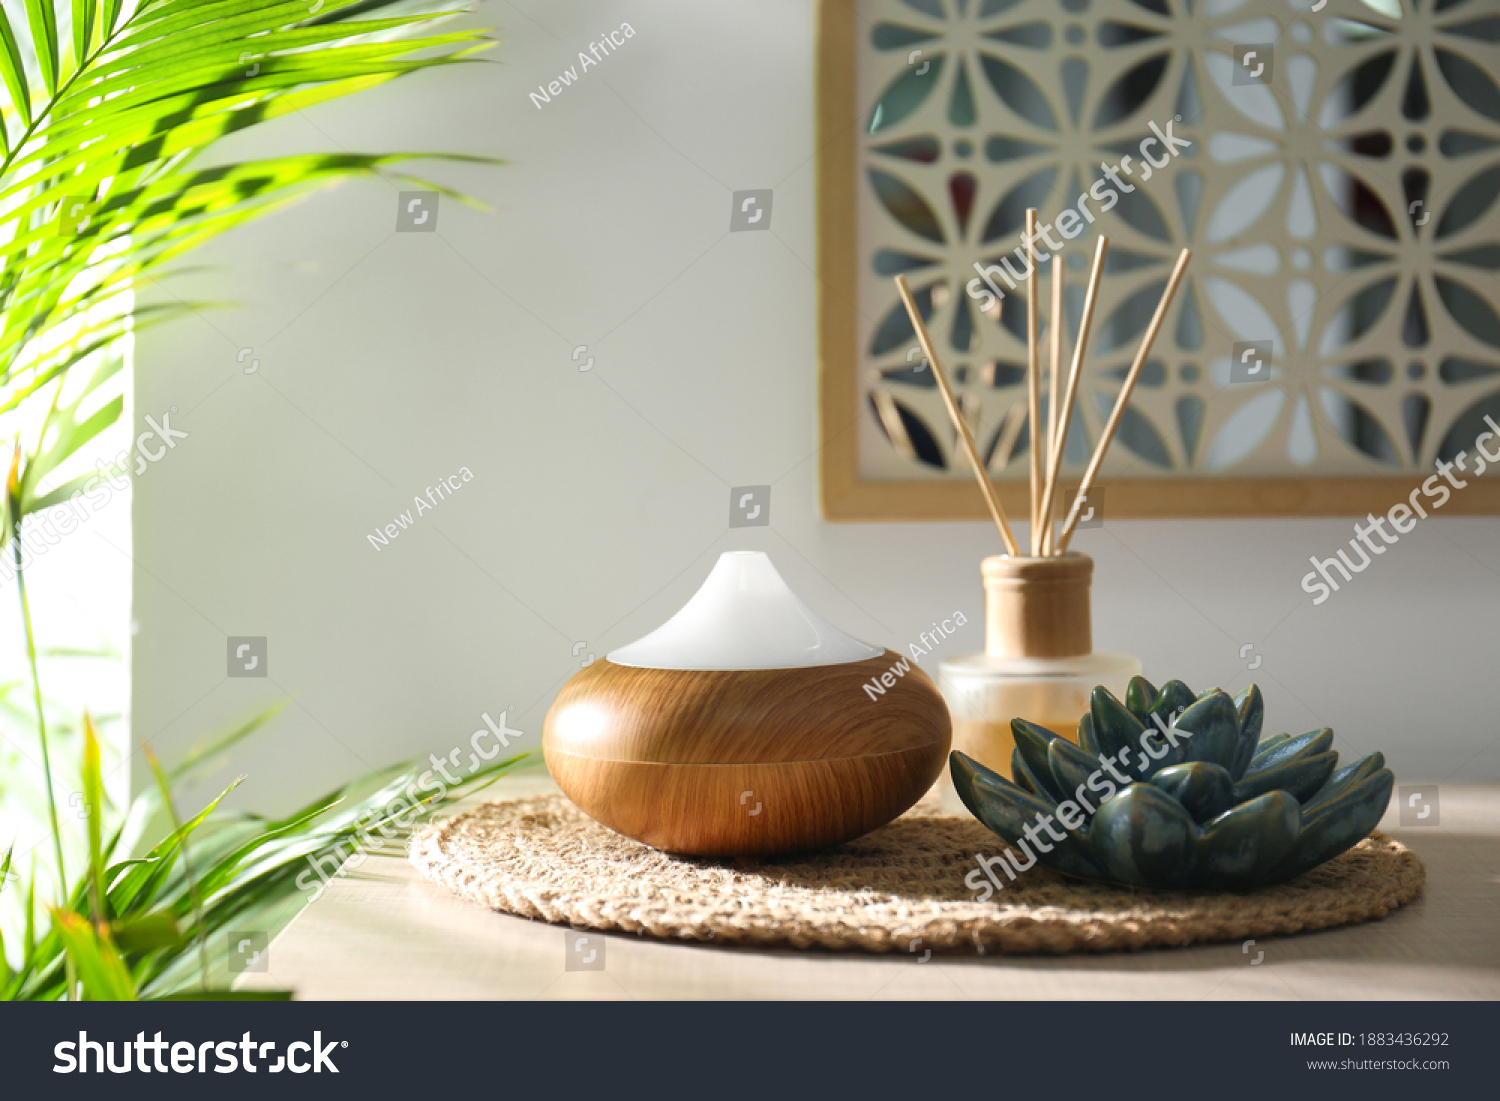 Aroma oil diffuser and reed air freshener on table in room #1883436292